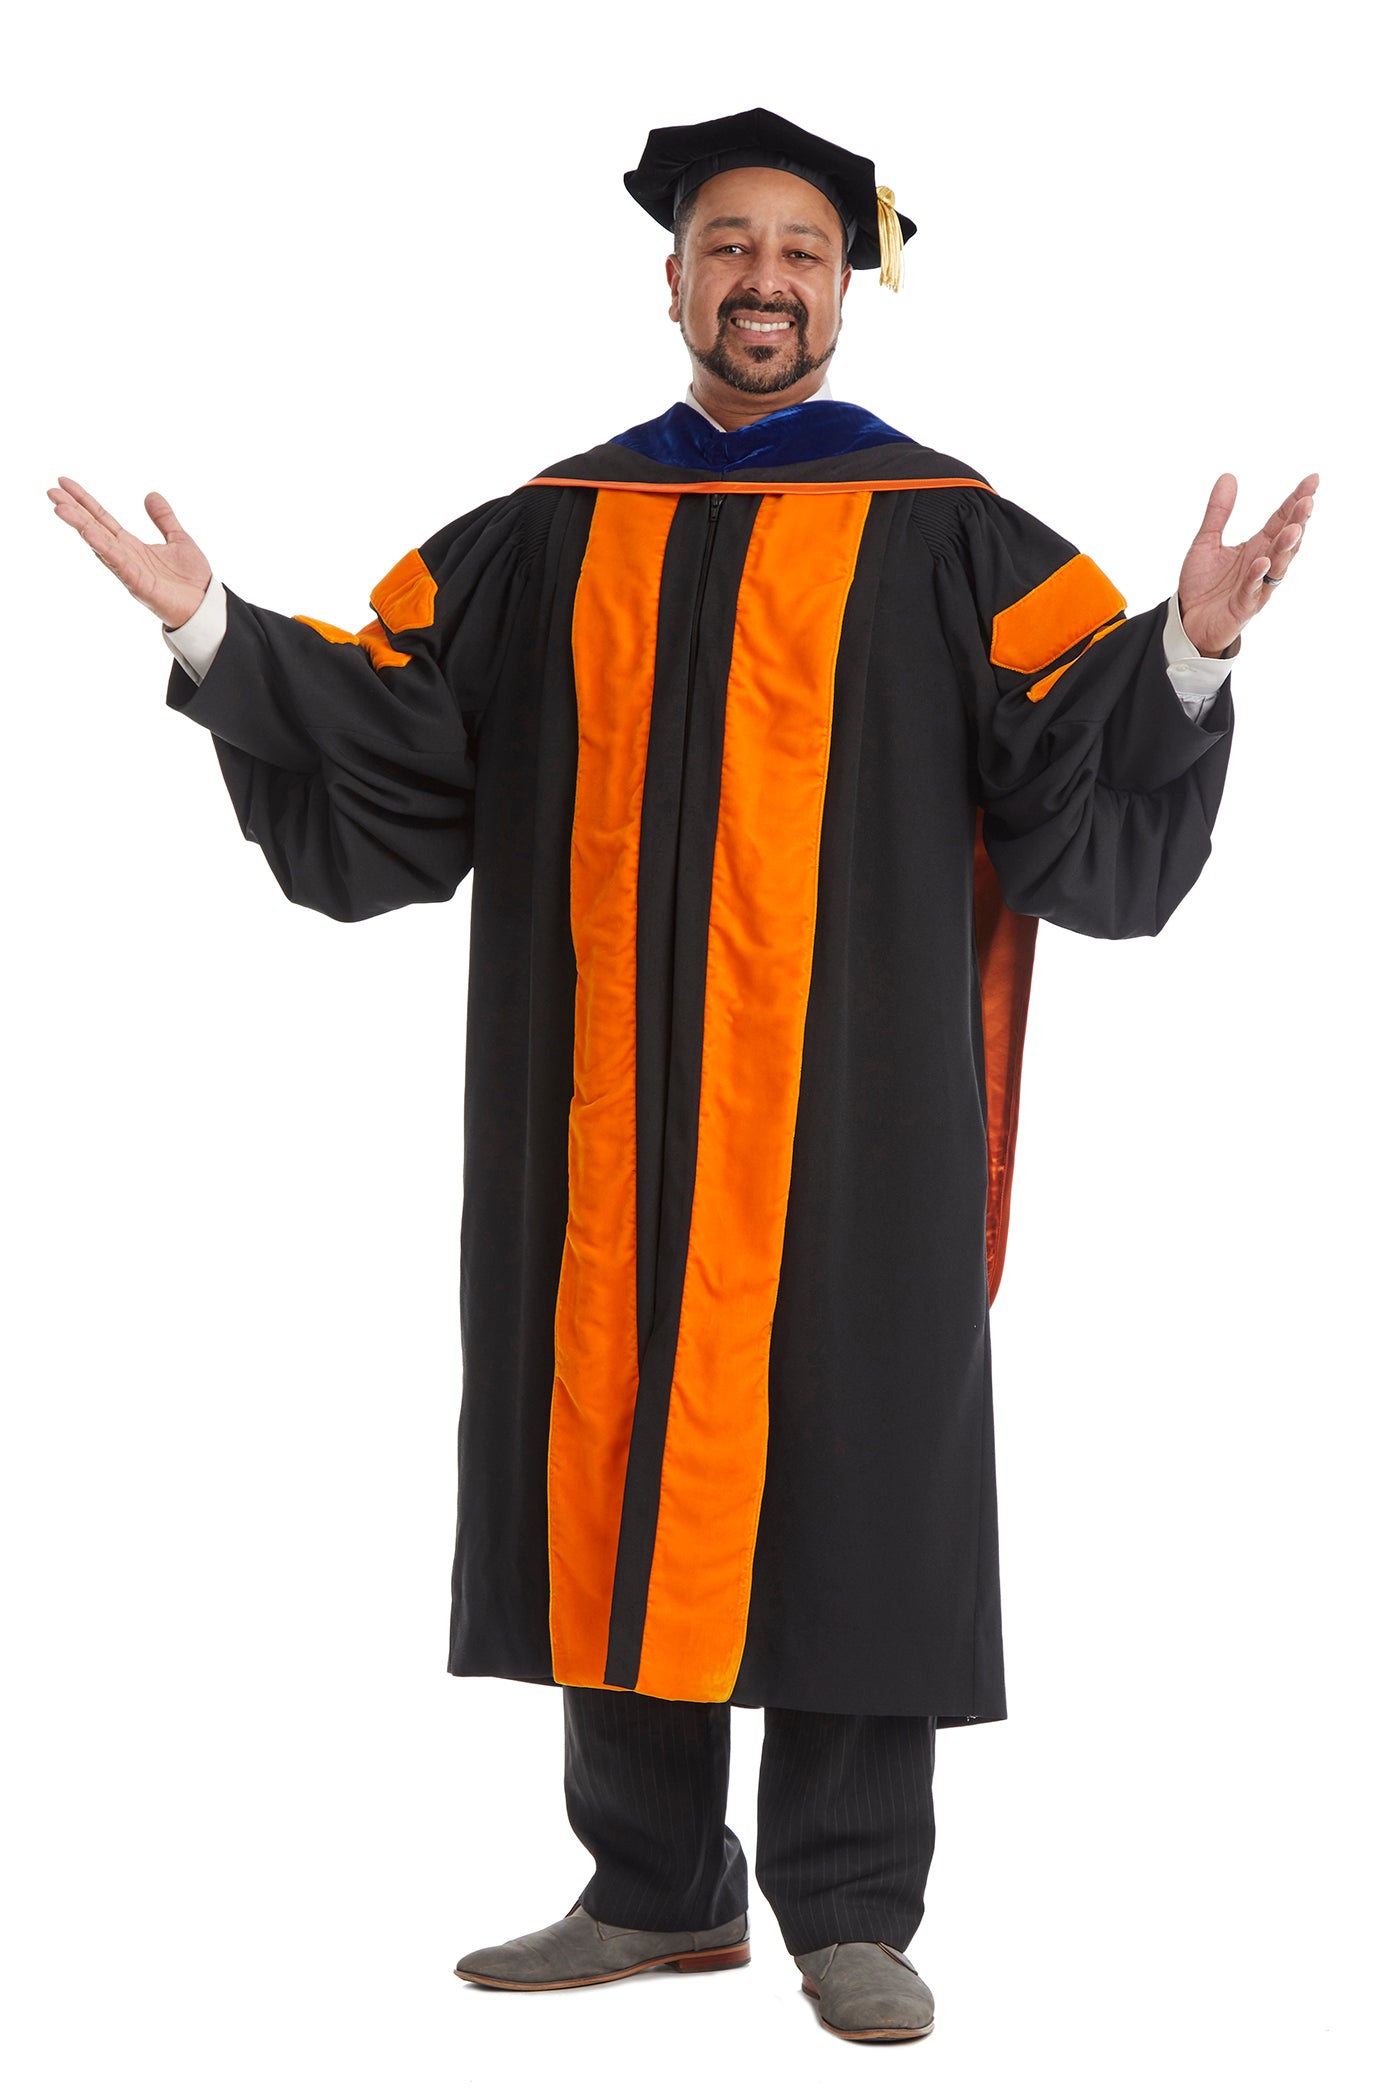 Princeton University Doctoral Regalia Rental Set. Doctoral Gown, PhD Hood, and Eight Sided Doctoral Tam with Tassel